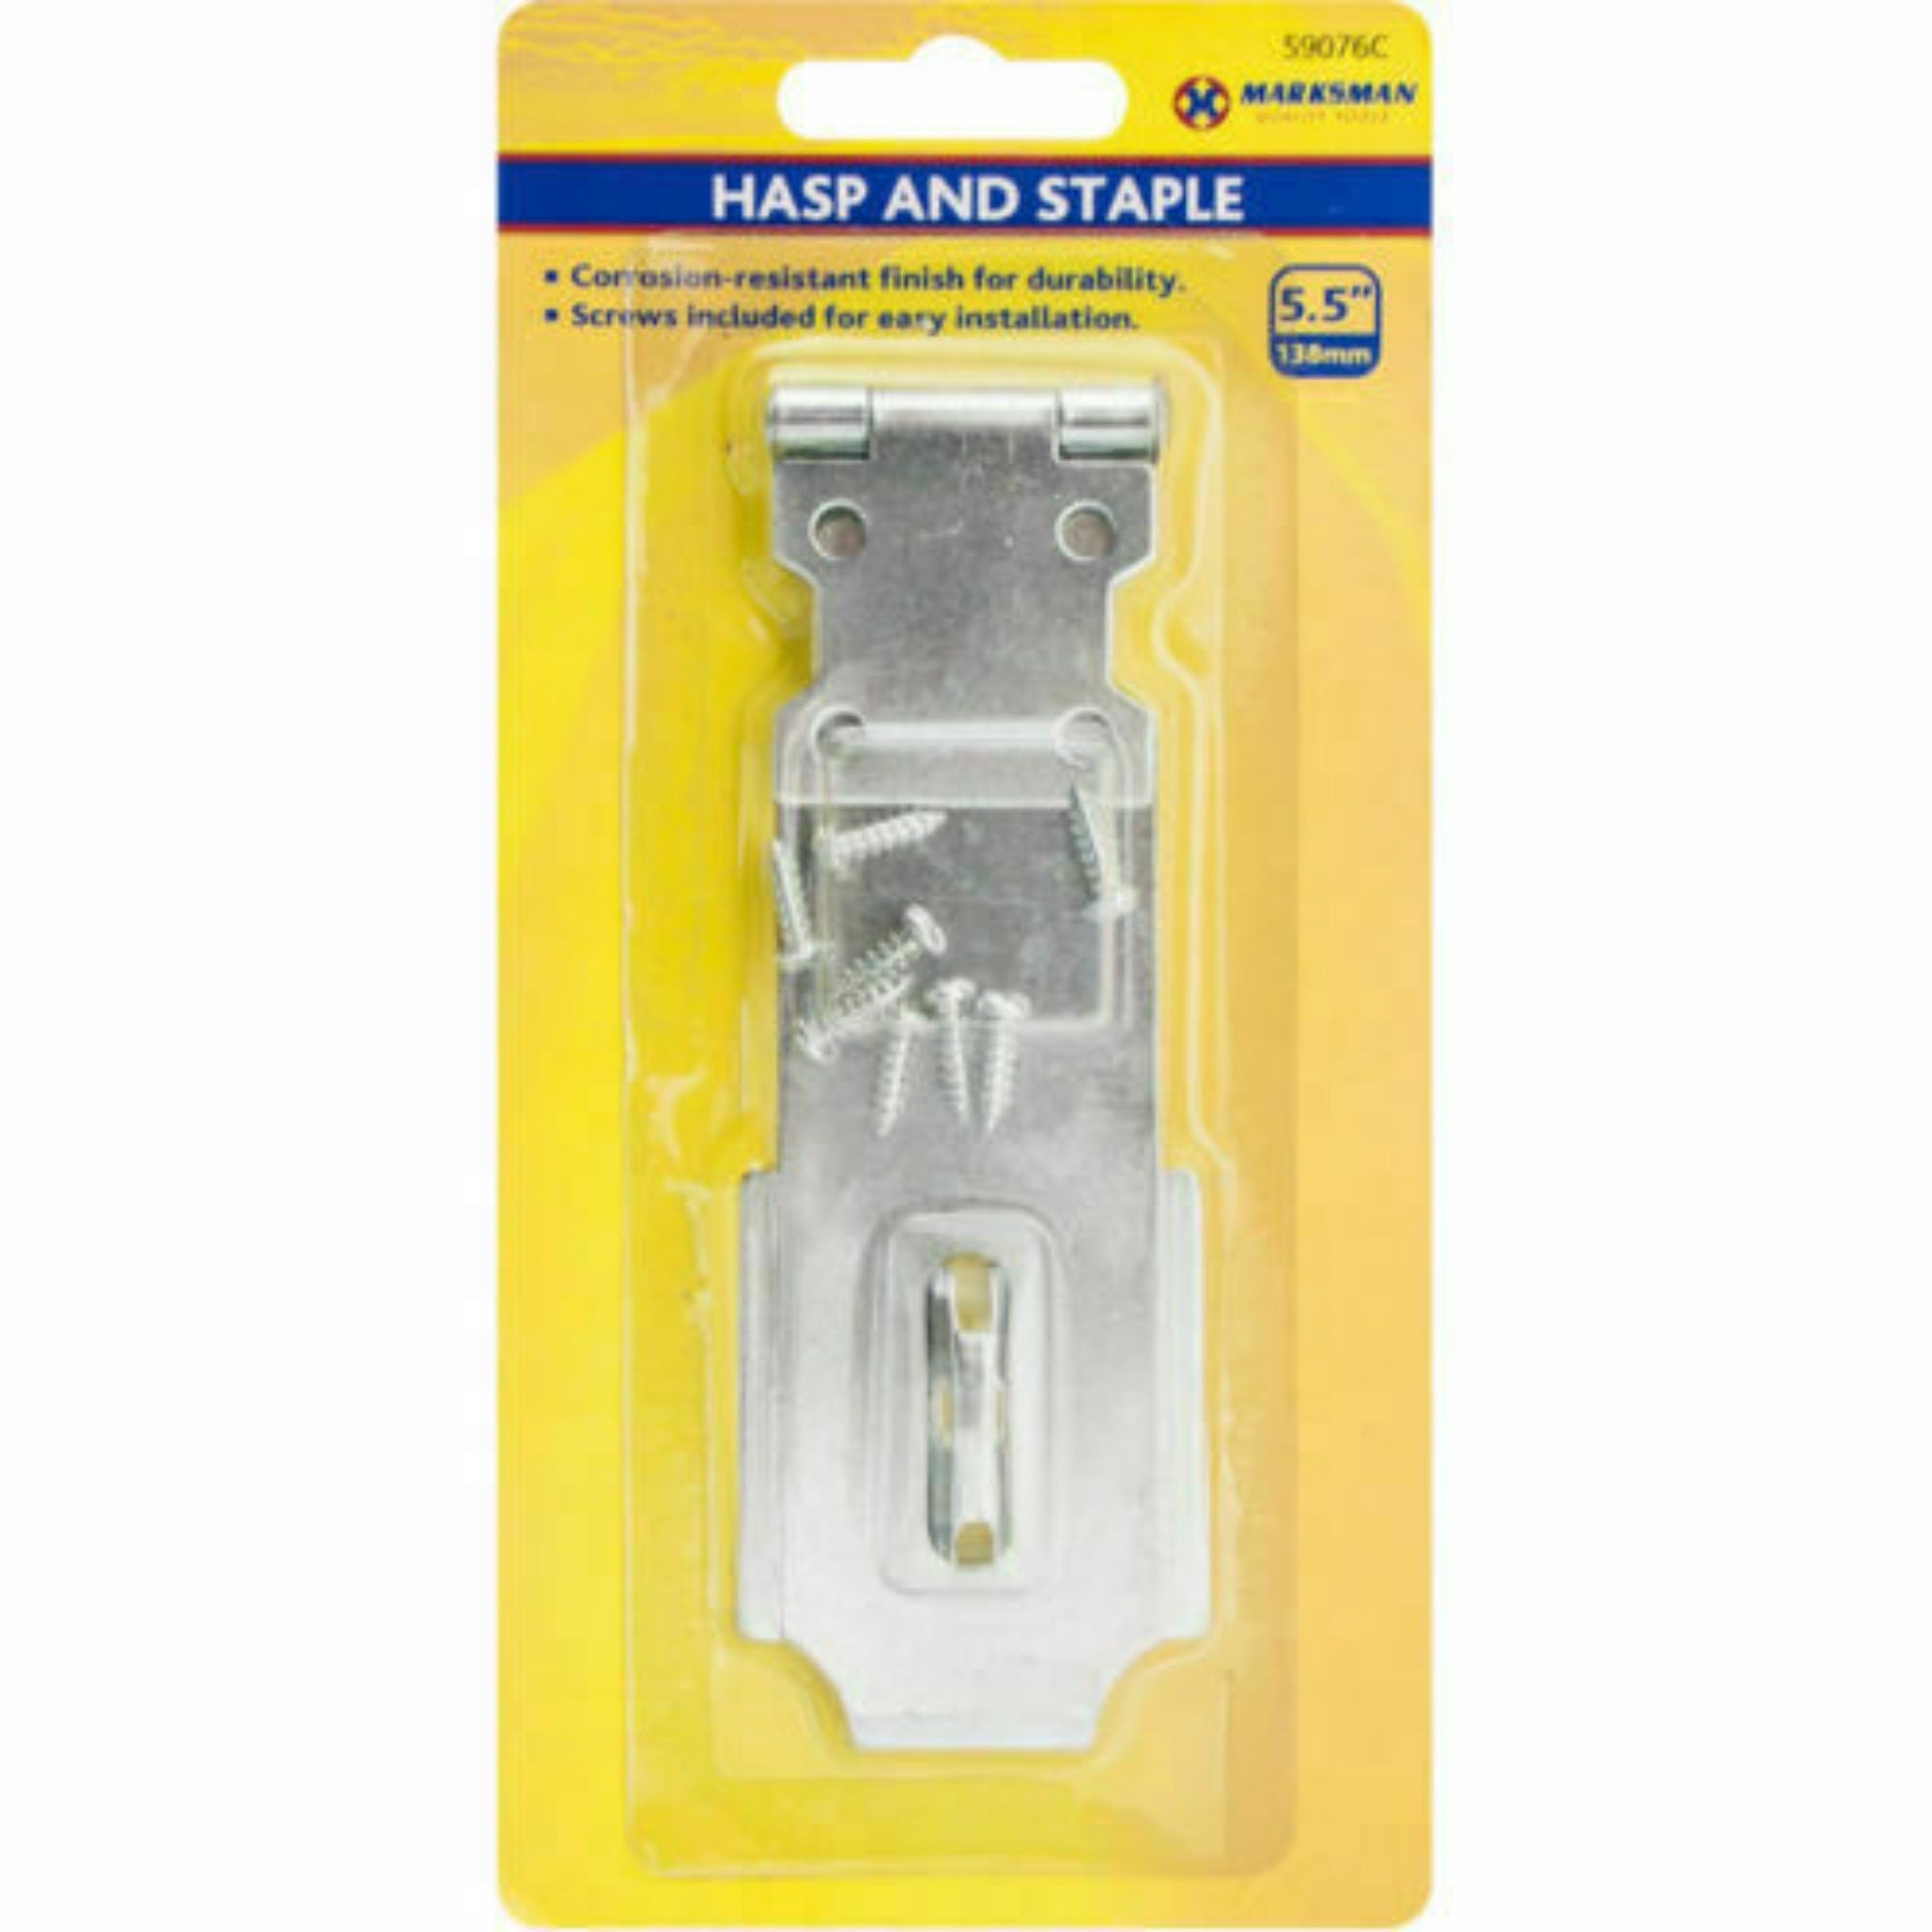 Beclen harp Shed Gate Door 5.5" Solid Safety Hasp and Staple Latch Lock Staple Cupboard With Screws Door & Multi Purpose Use